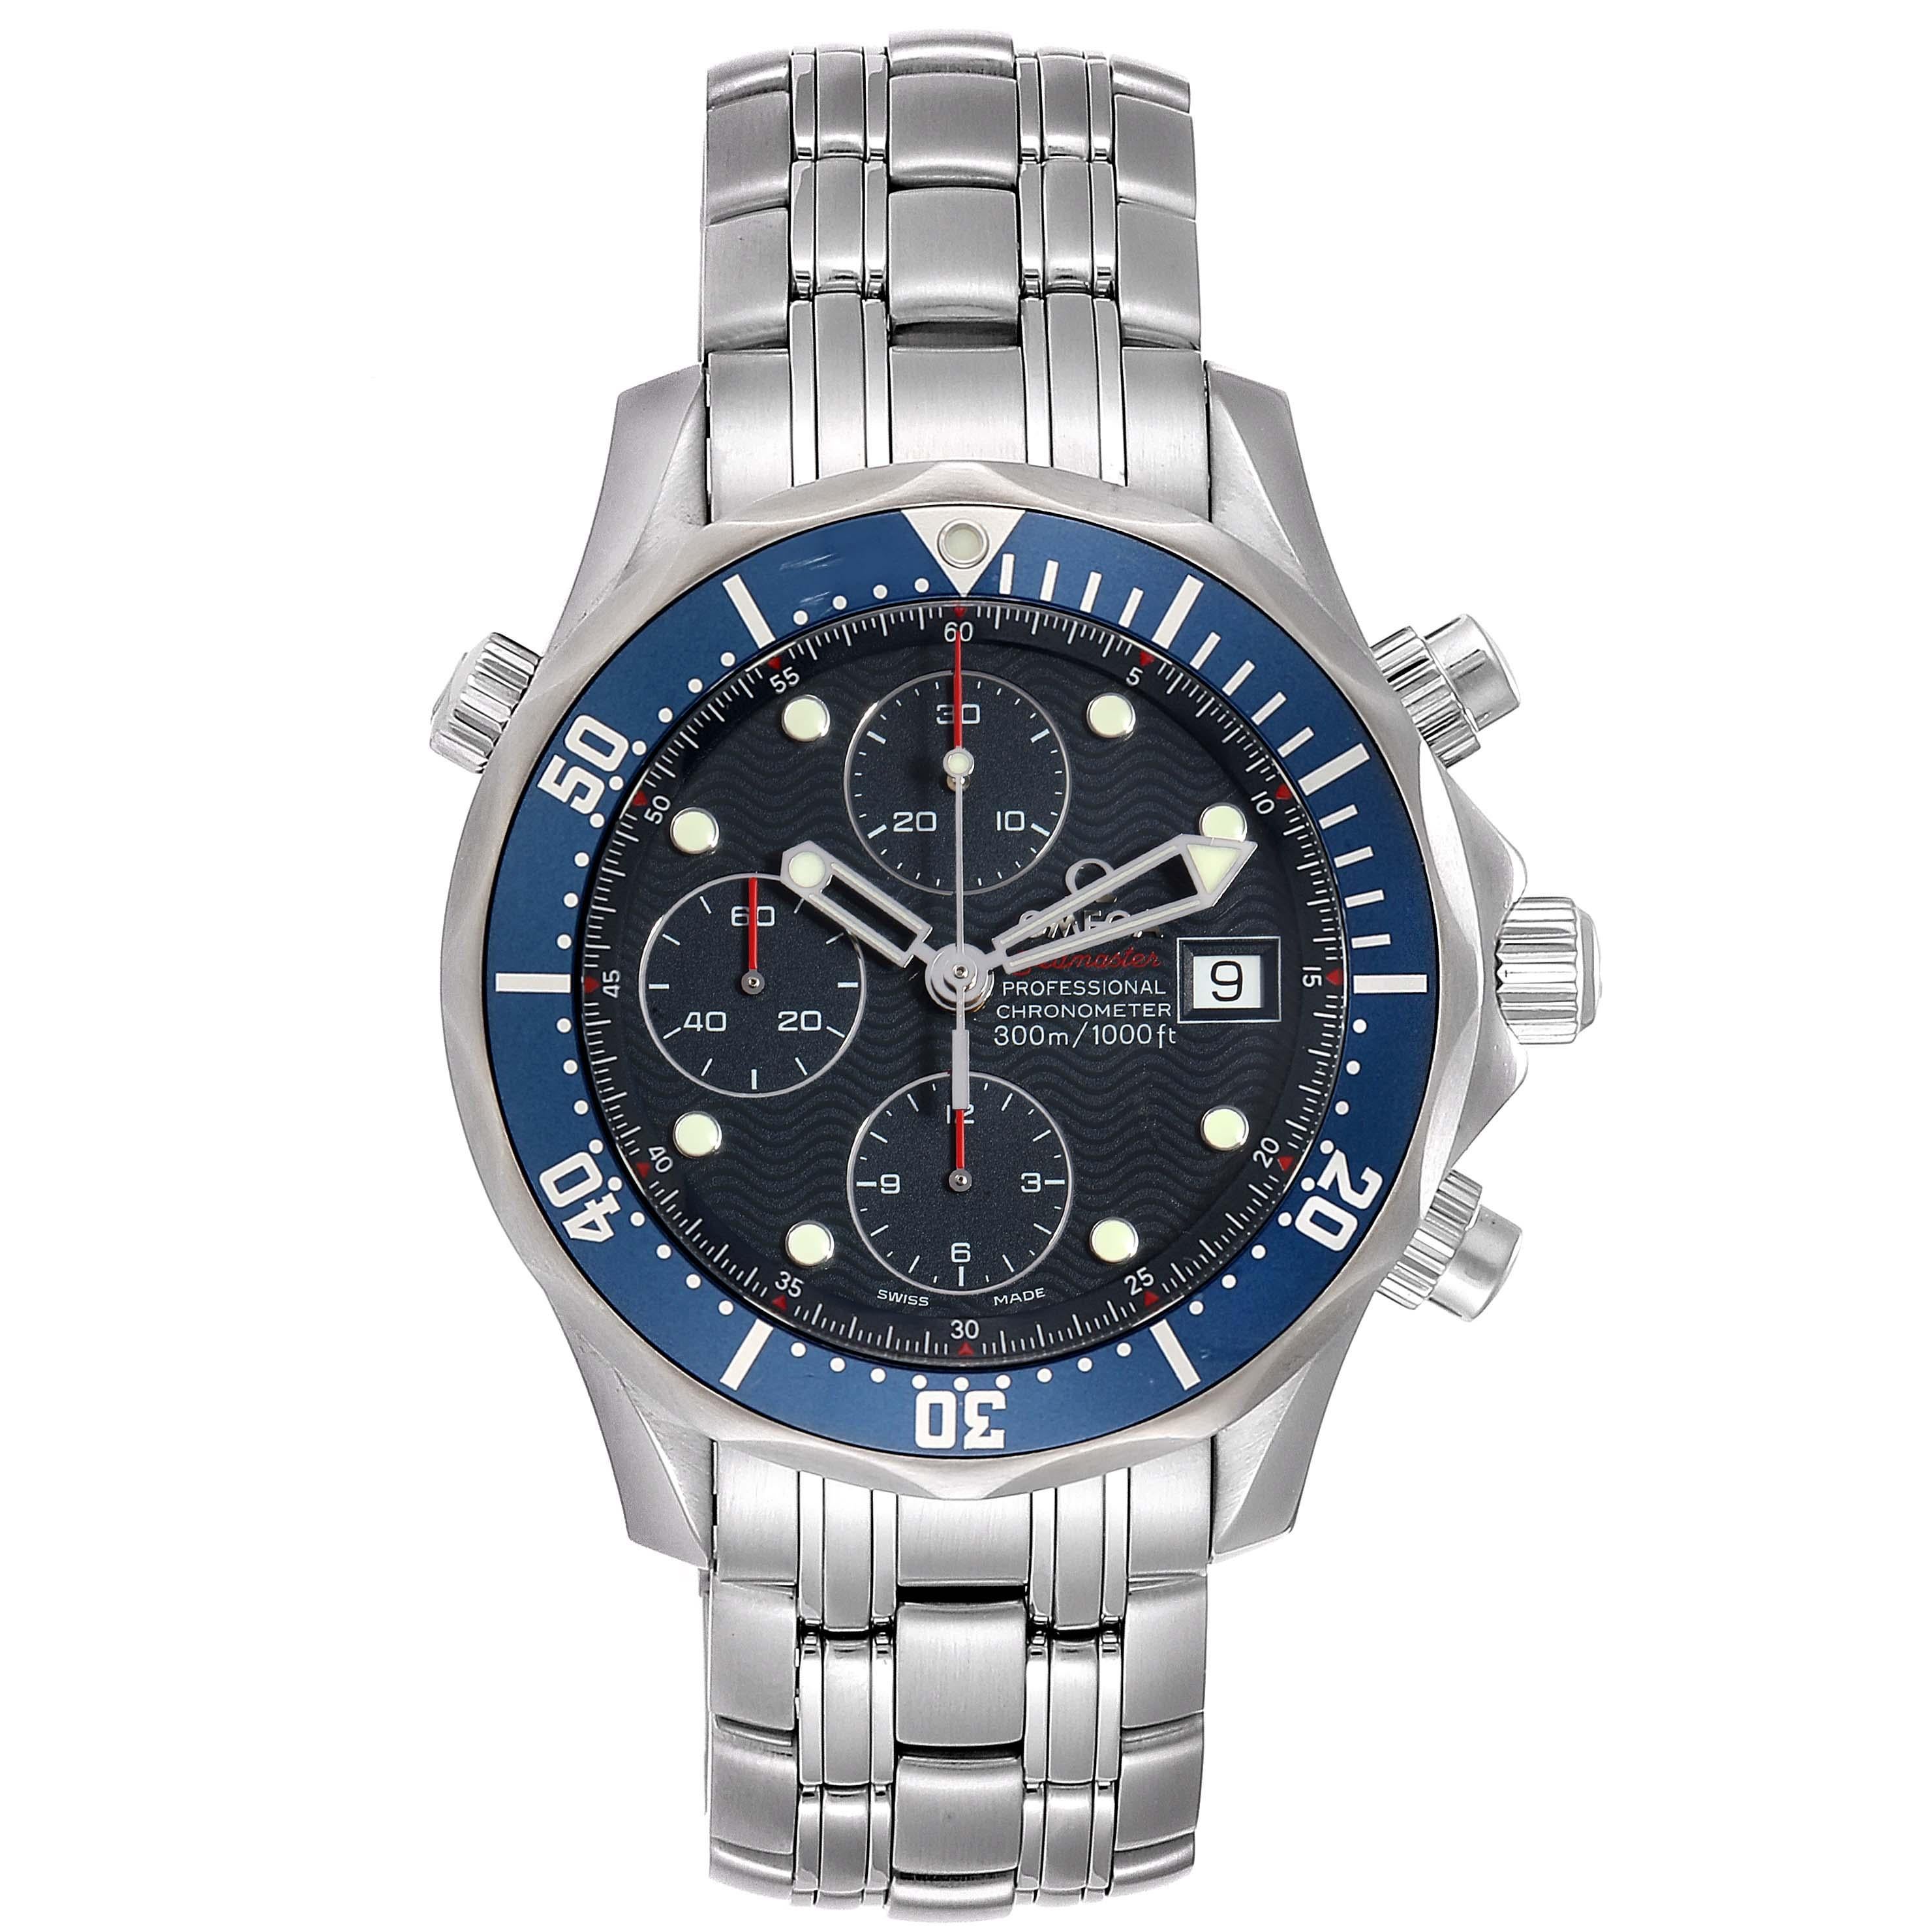 Omega Seamaster 300m Chronograph Automatic 41.5 mm Watch 2225.80.00. Officially certified chronometer automatic self-winding movement. Chronograph function. Brushed and polished stainless steel case 41.5 mm in diameter. Omega logo on a crown. Blue